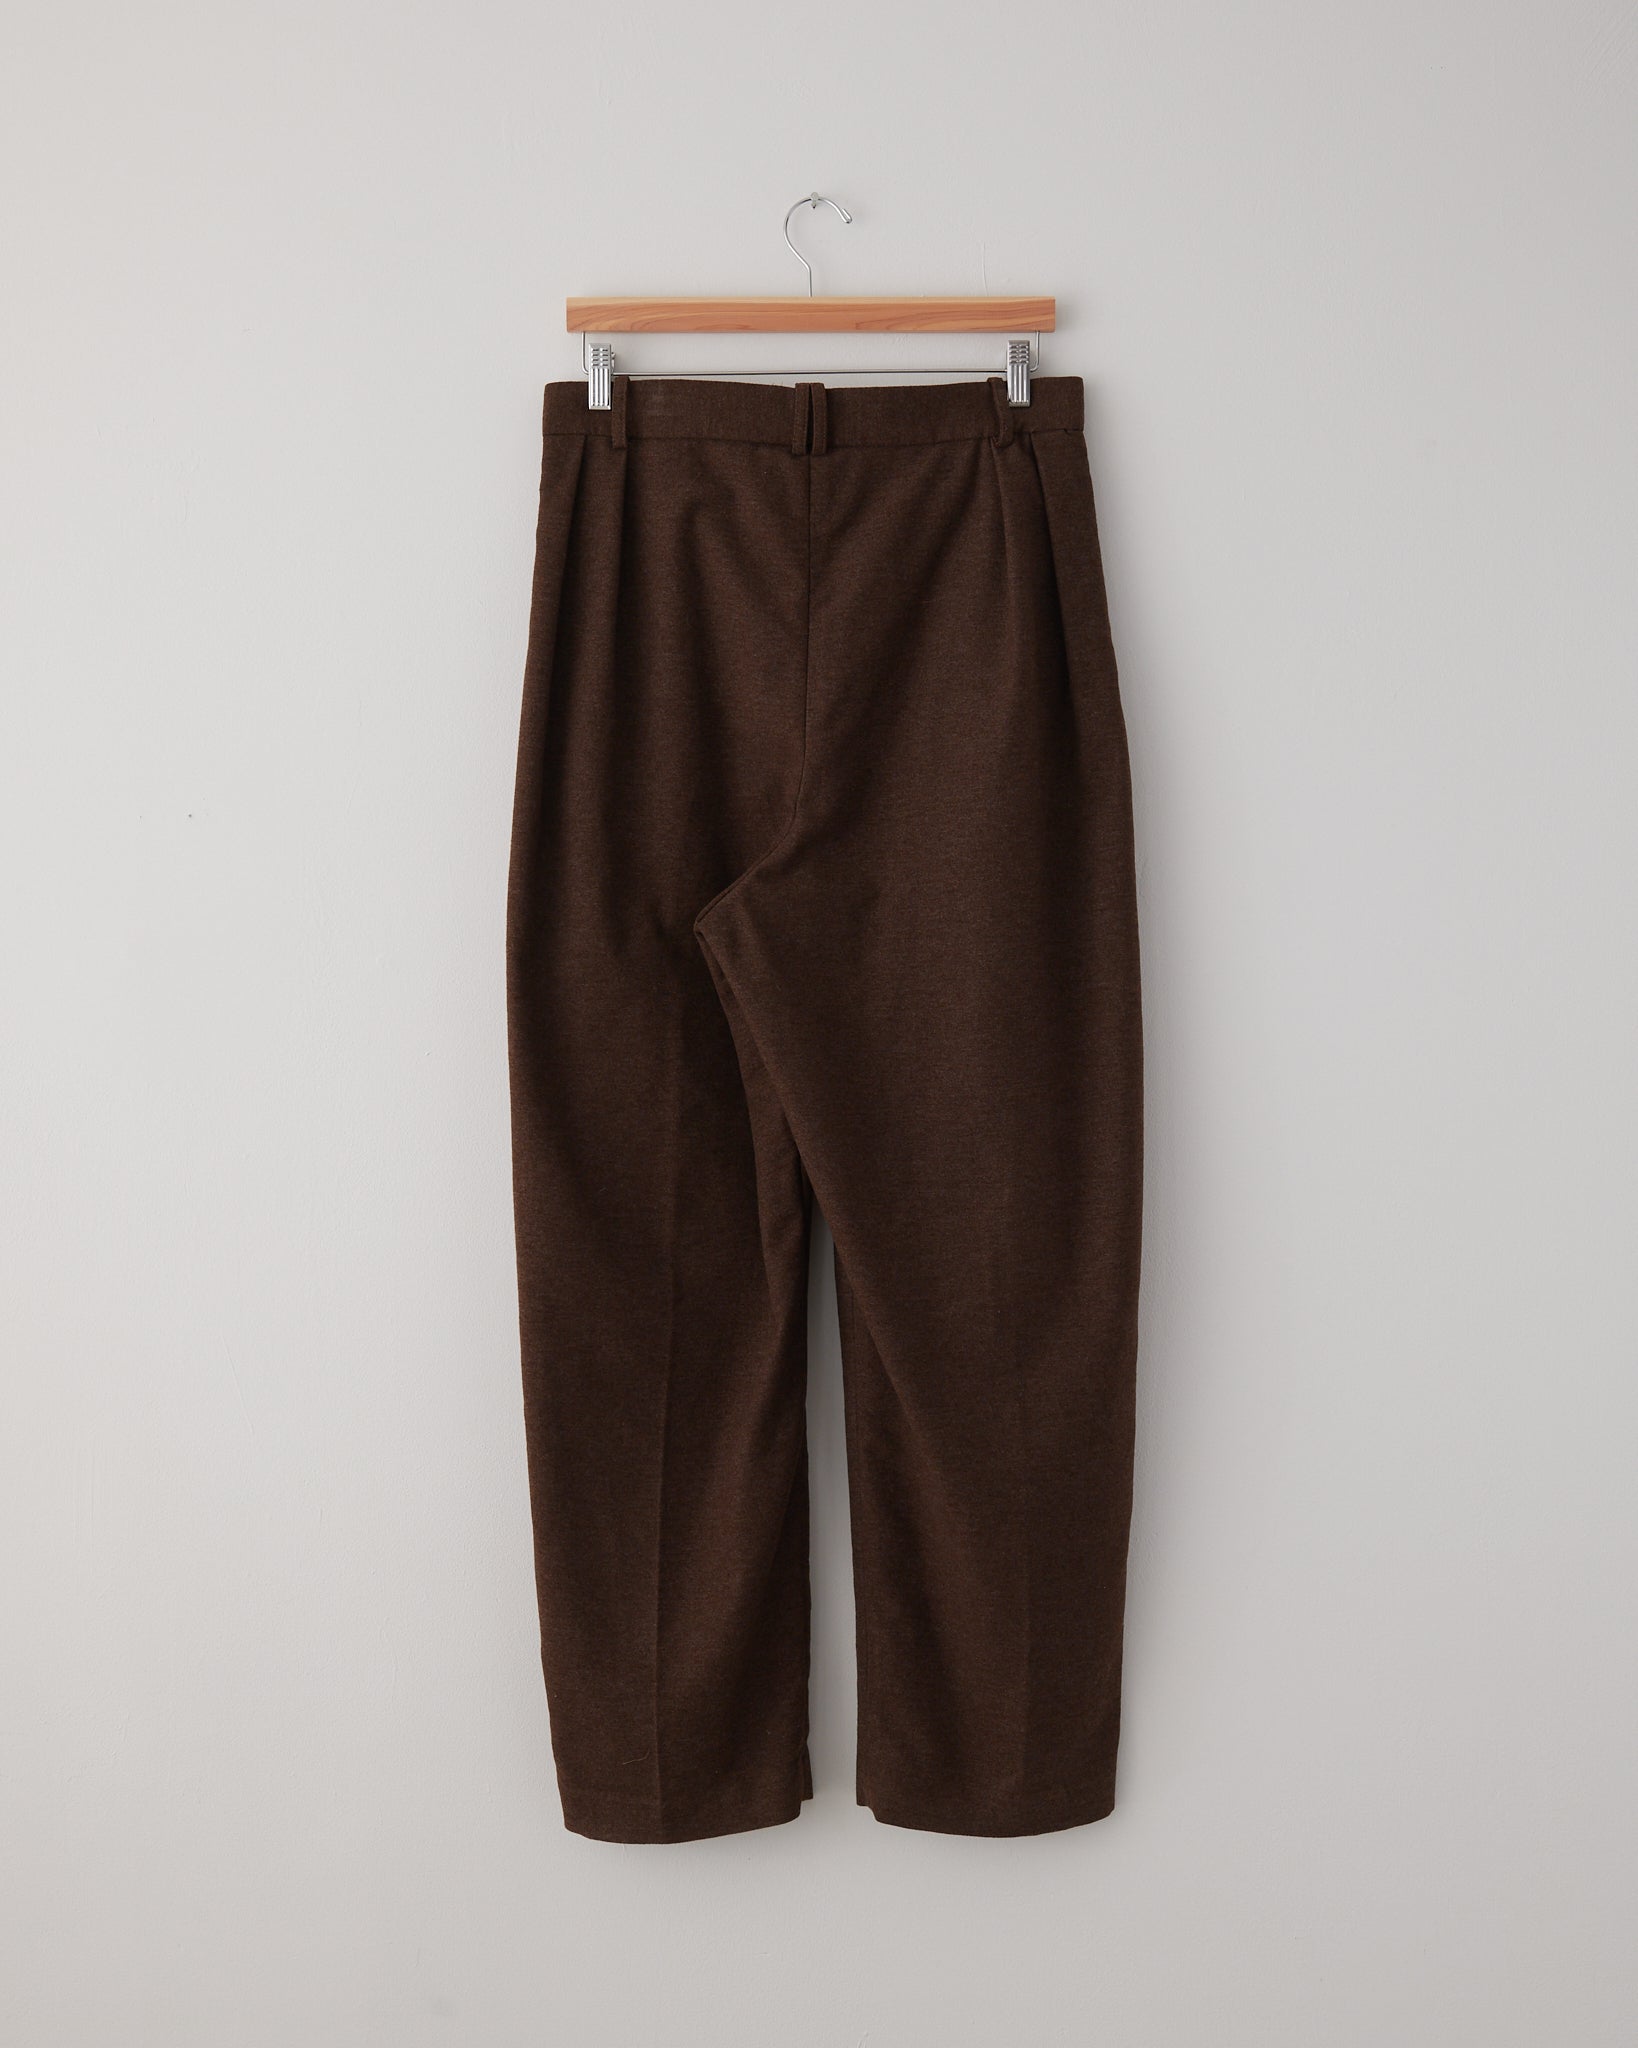 Pleated Pants, Cotton Flannel